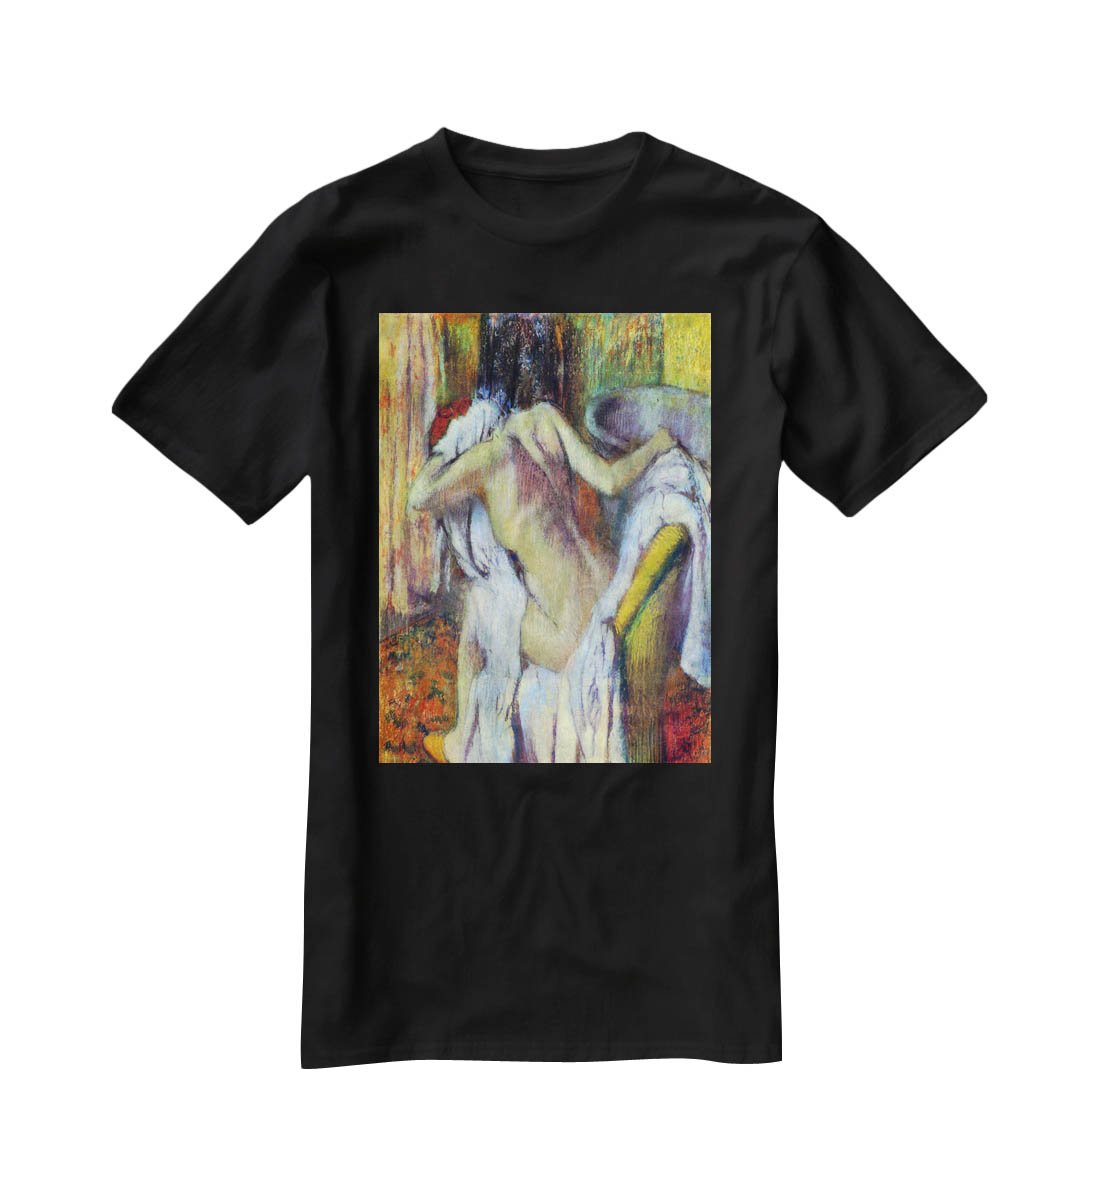 After Bathing 4 by Degas T-Shirt - Canvas Art Rocks - 1